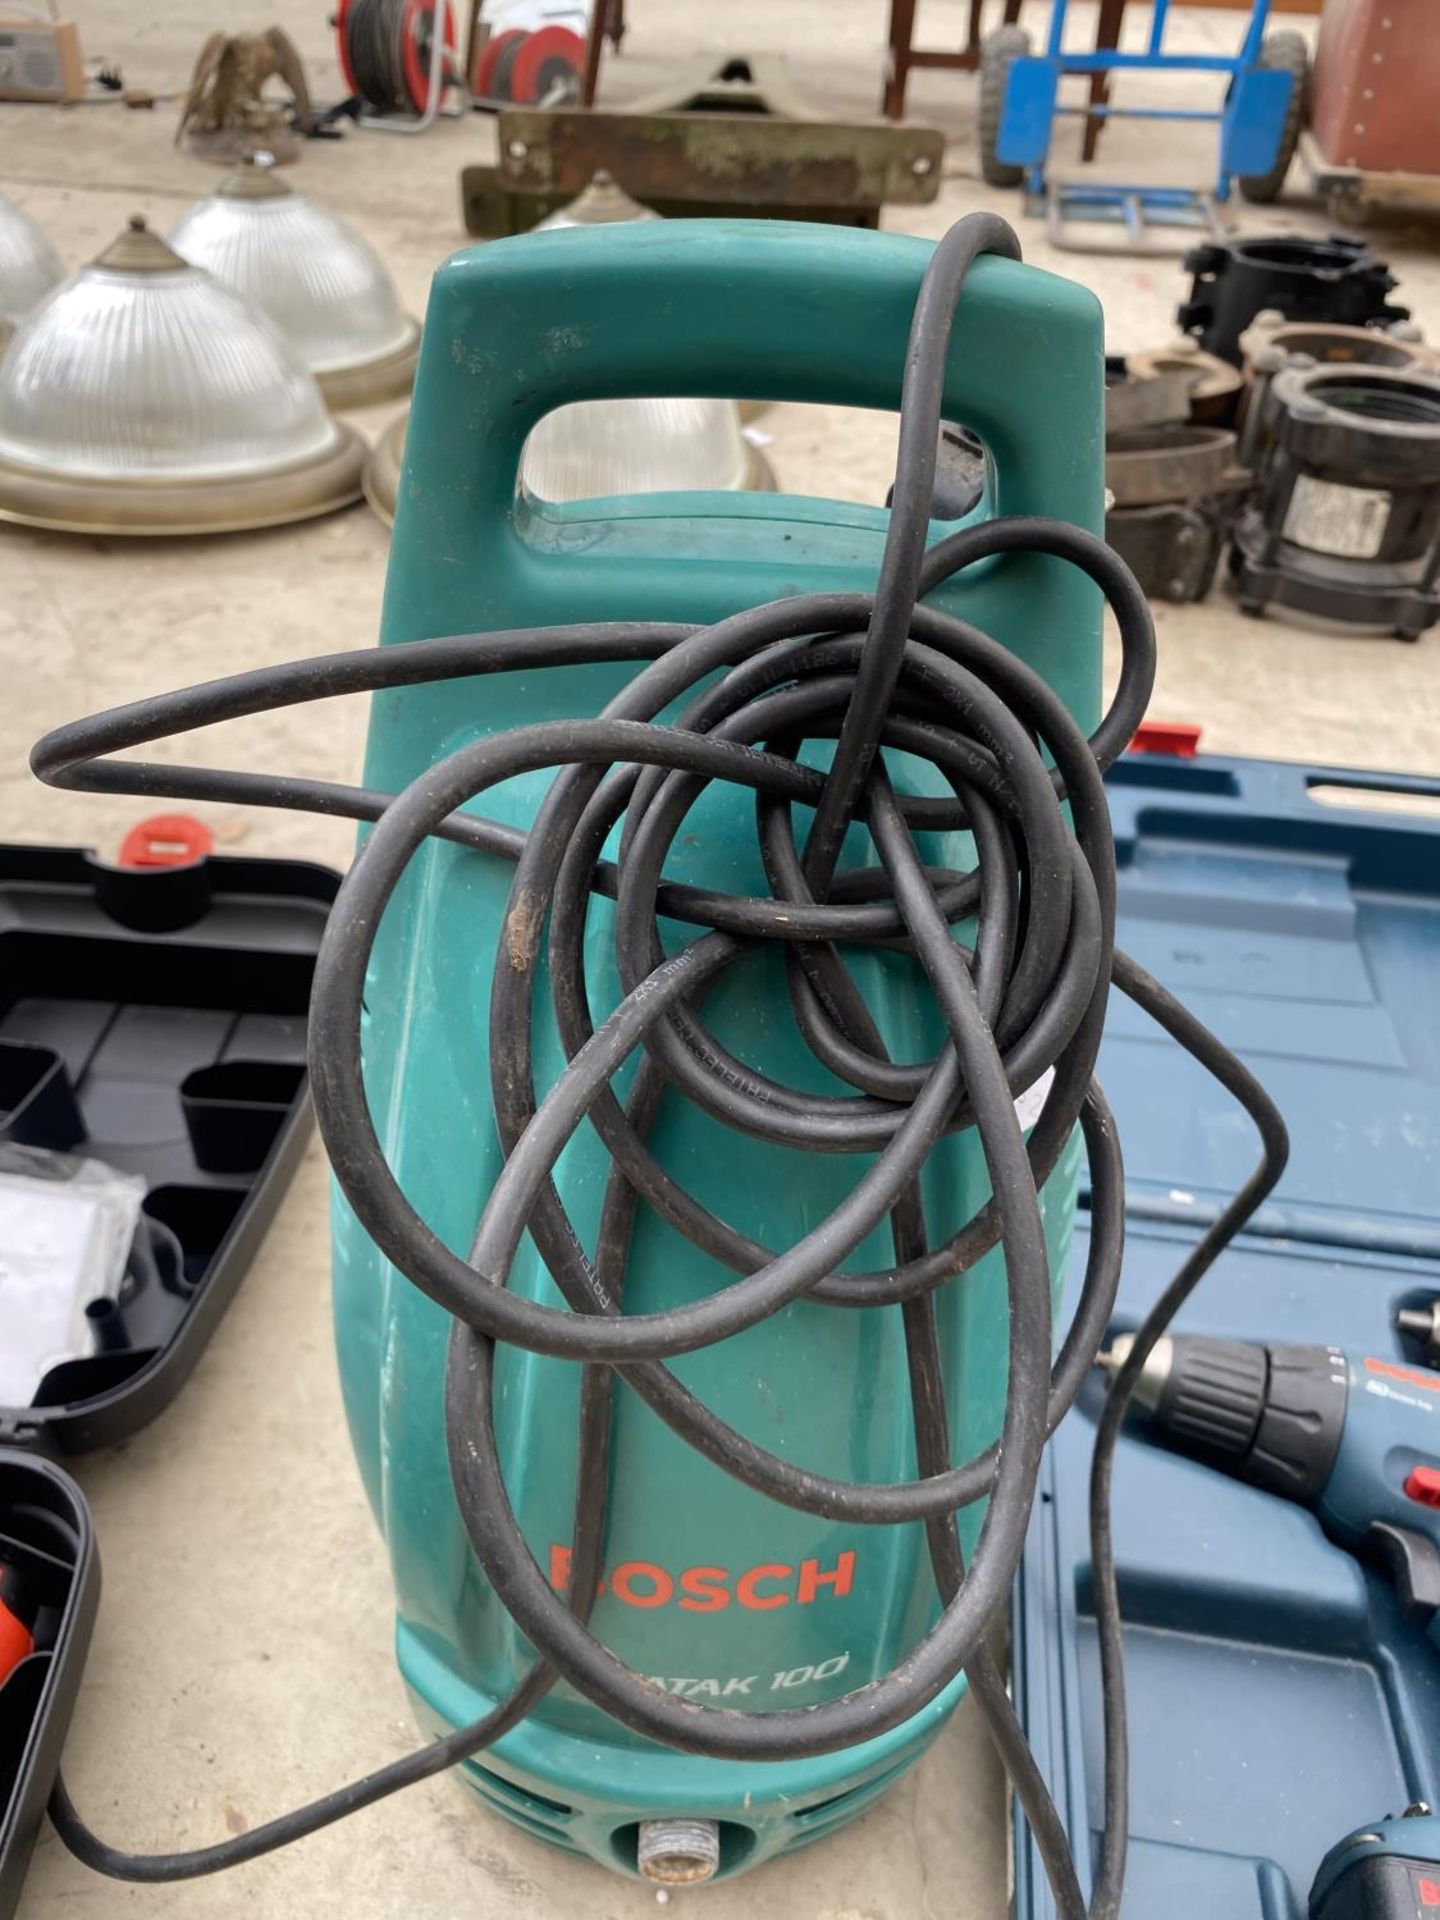 TWO BOSCH DRILLS AND A BOSCH ELECTRIC PRESSURE WASHER - Image 3 of 3